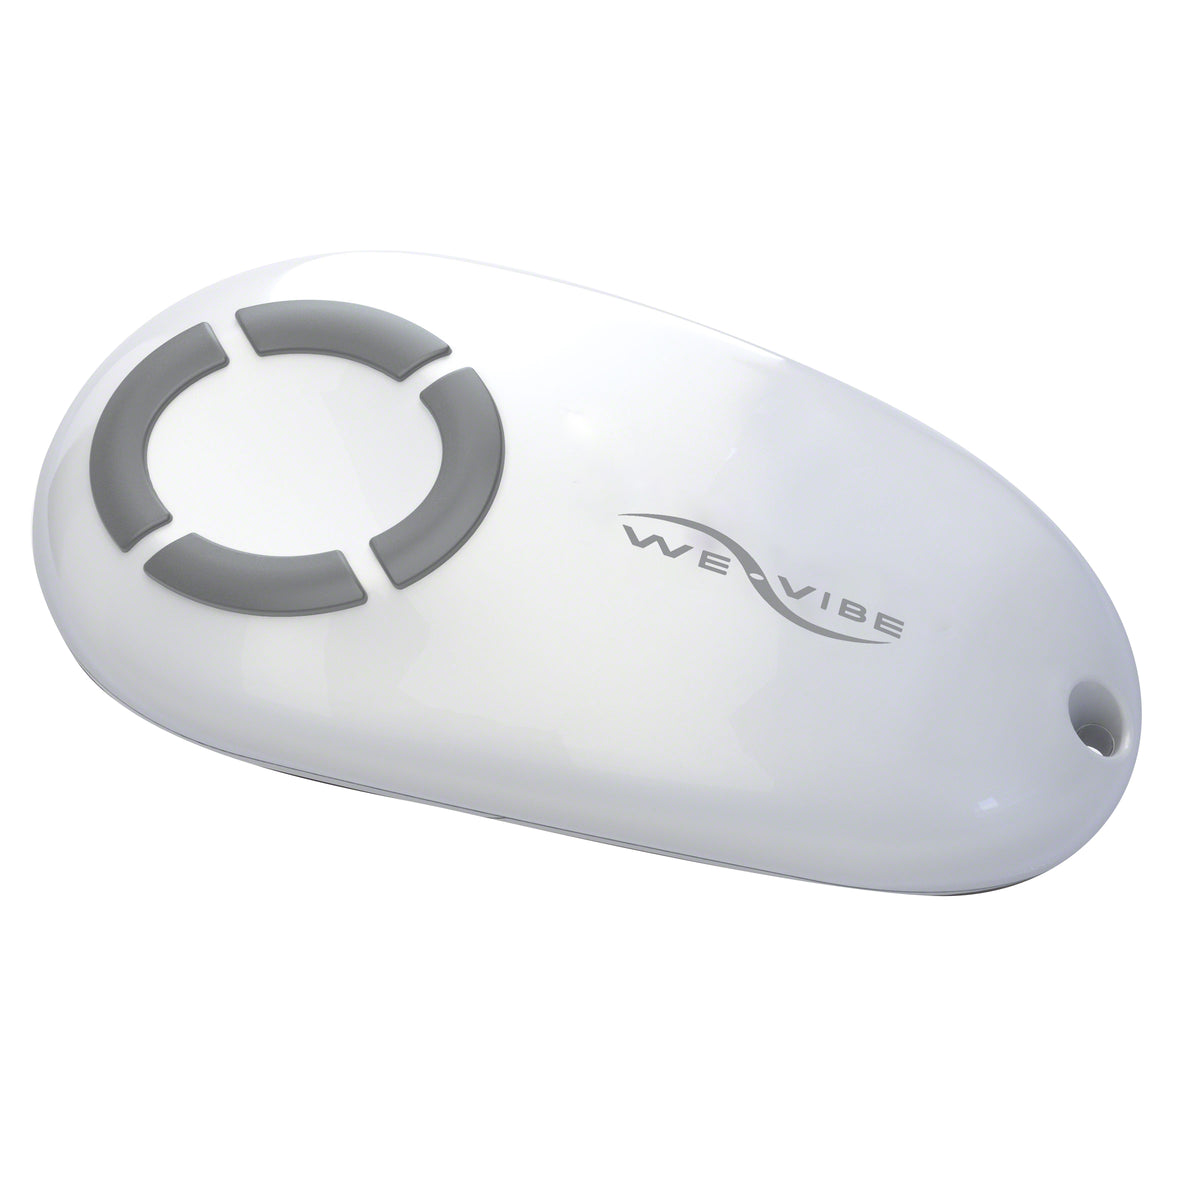 We-Vibe Replacement Remote for We-Vibe 4 Plus and We-Vibe Classic